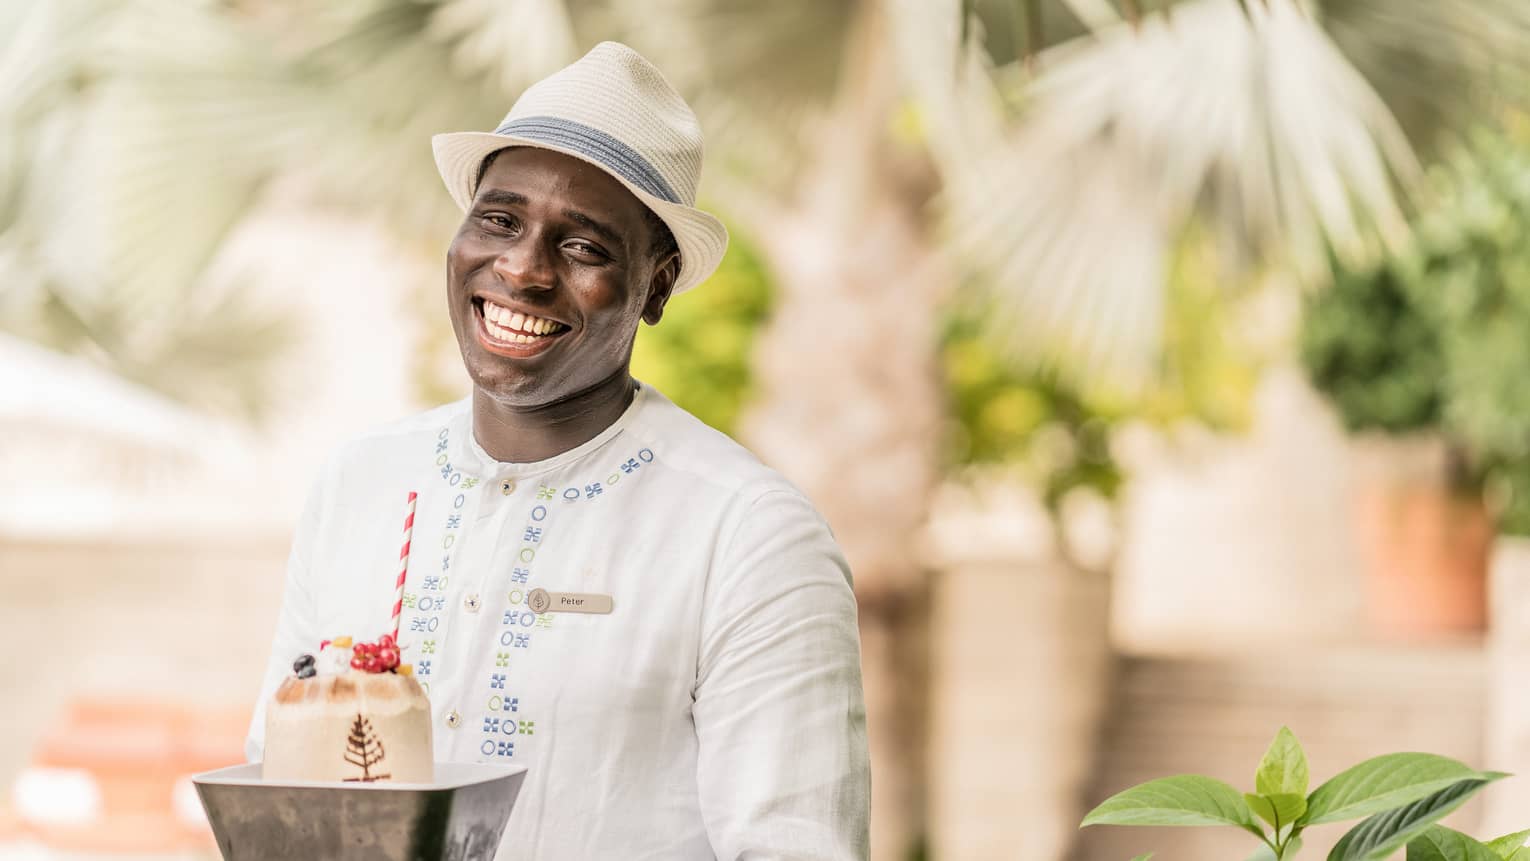 Pool staff member in white tunic and fedora holding ice cream dessert with striped straw